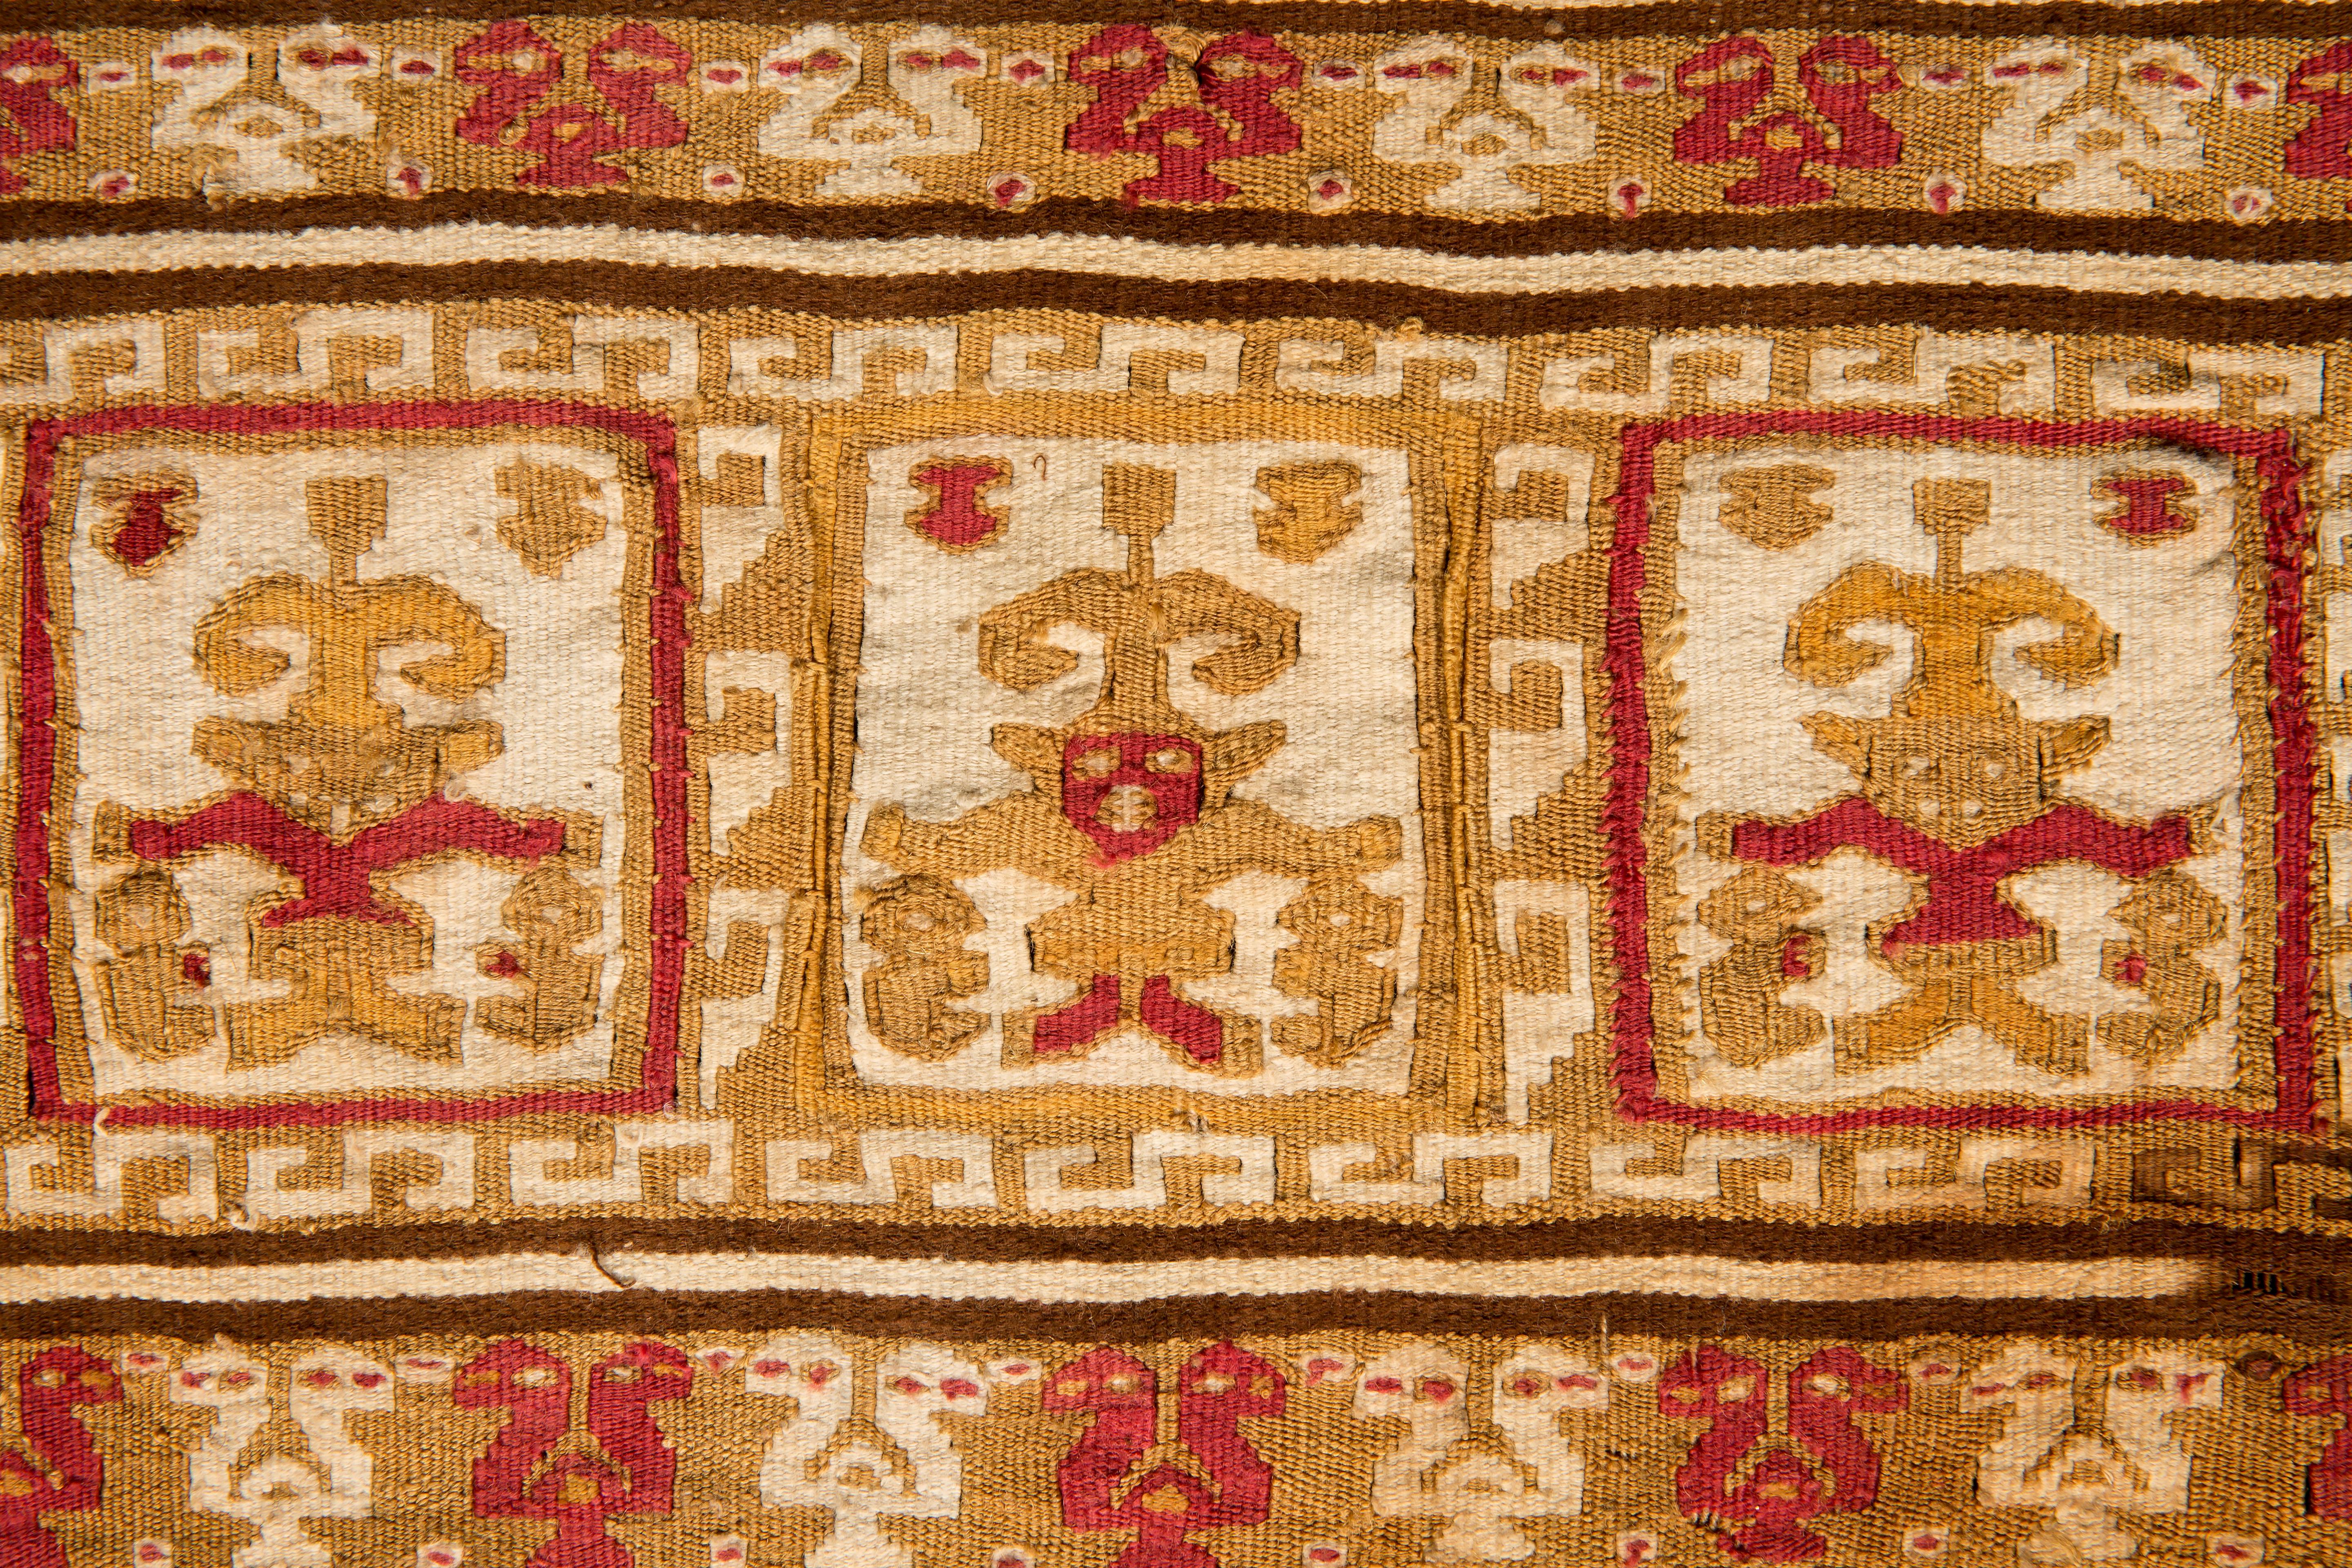 Pre-Columbian ornamental banner with fringes composed of warriors/divinities holding figures in their hands, surrounded by geometric frets. Two-headed birds in alternating colors decorate the top and bottom of the banner. This one-of-a-kind tapestry